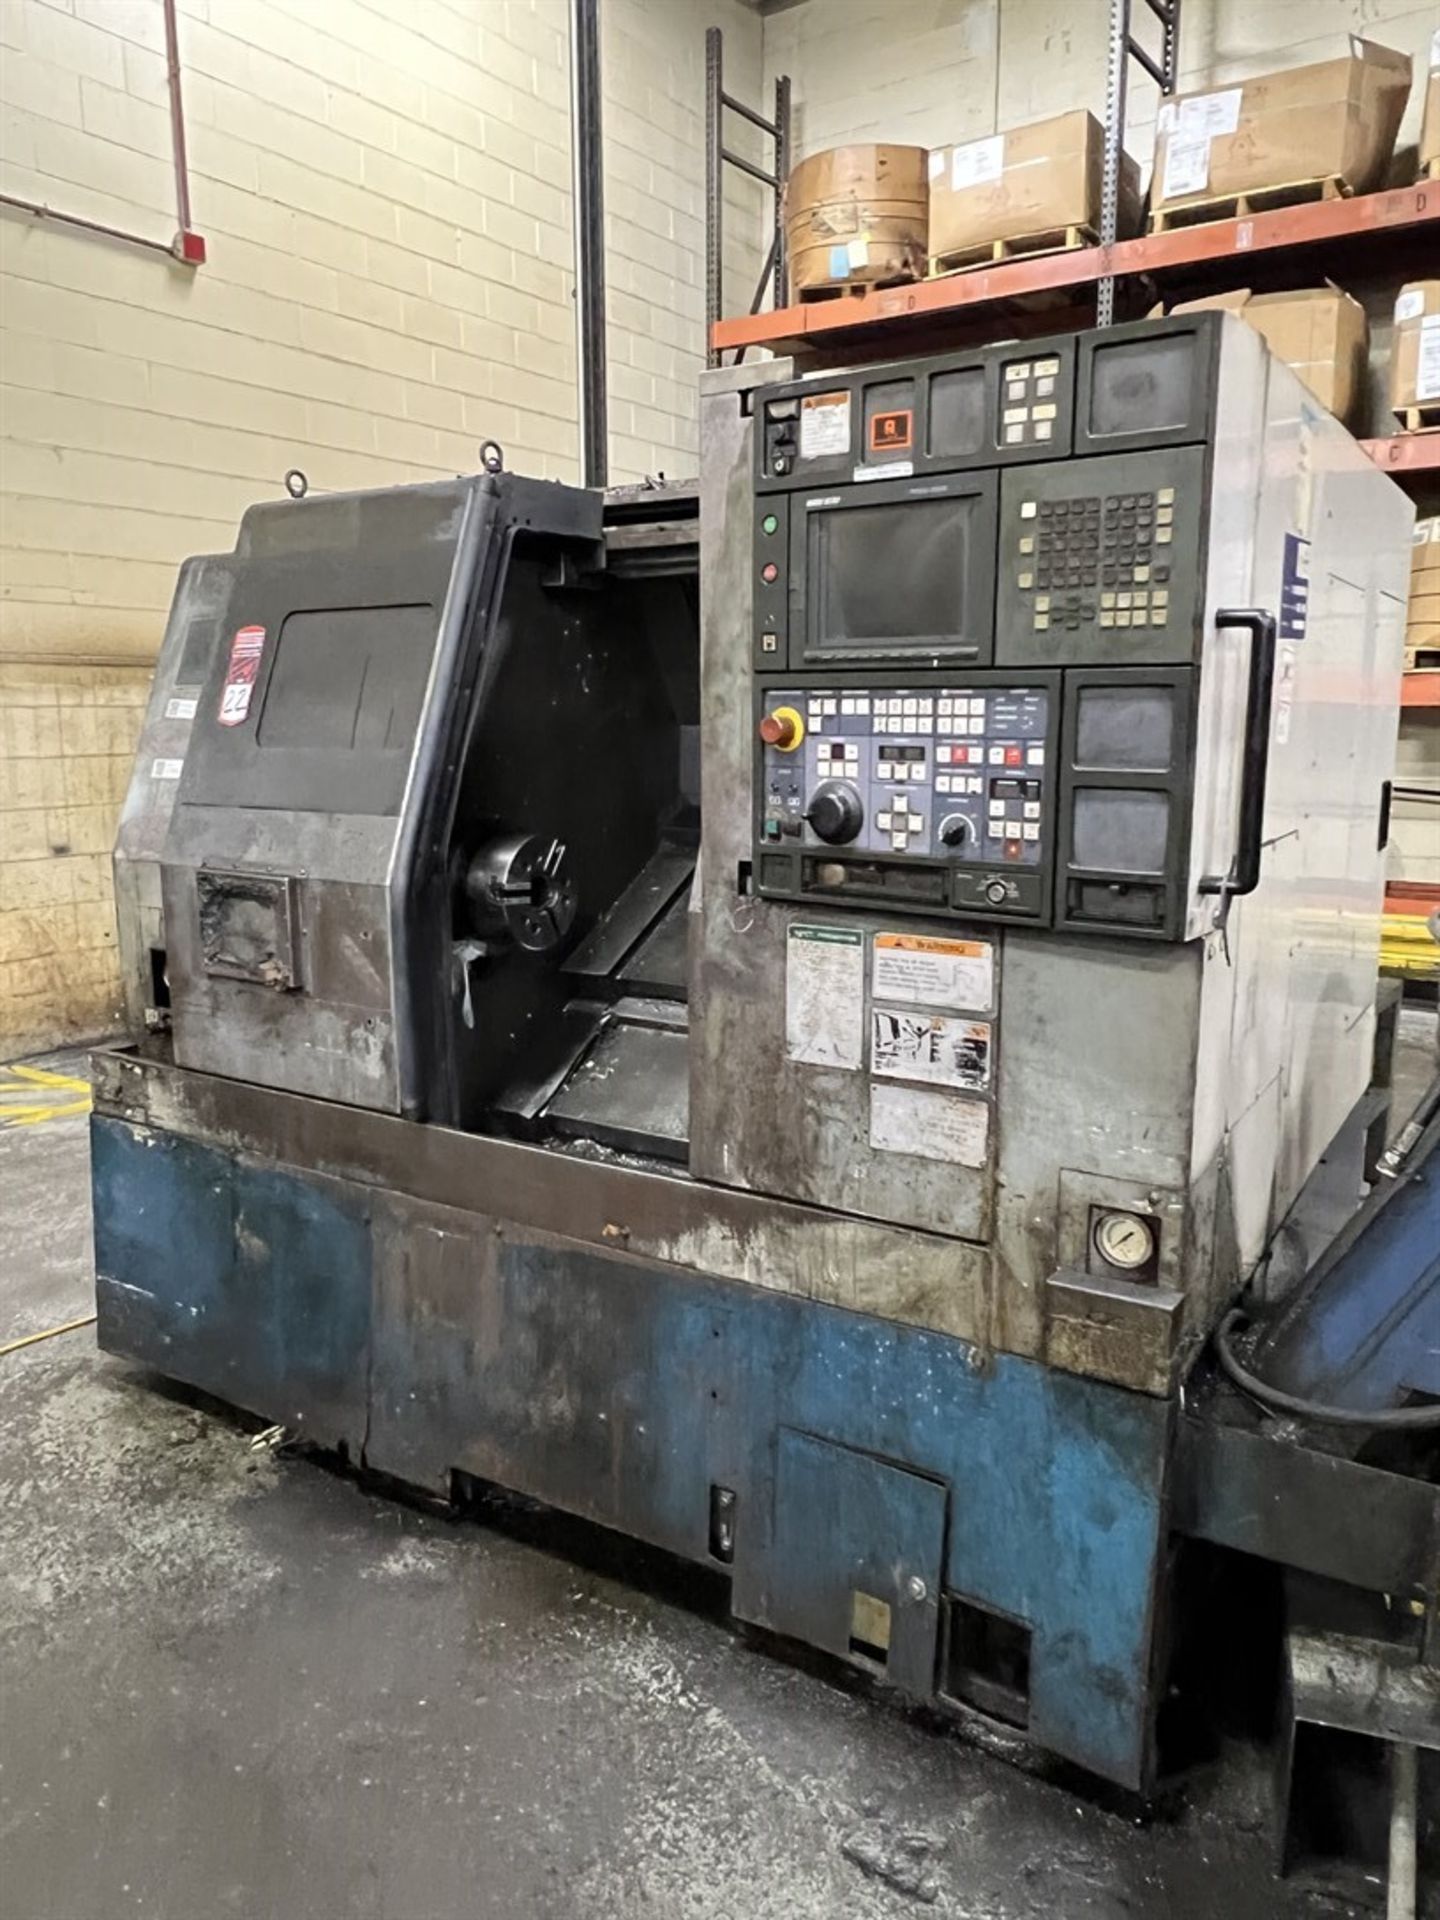 MORI SEIKI SL-200 CNC Turning Center, s/n 884, MSC-500 Control, (Parts Machine) (A rigging and - Image 2 of 12